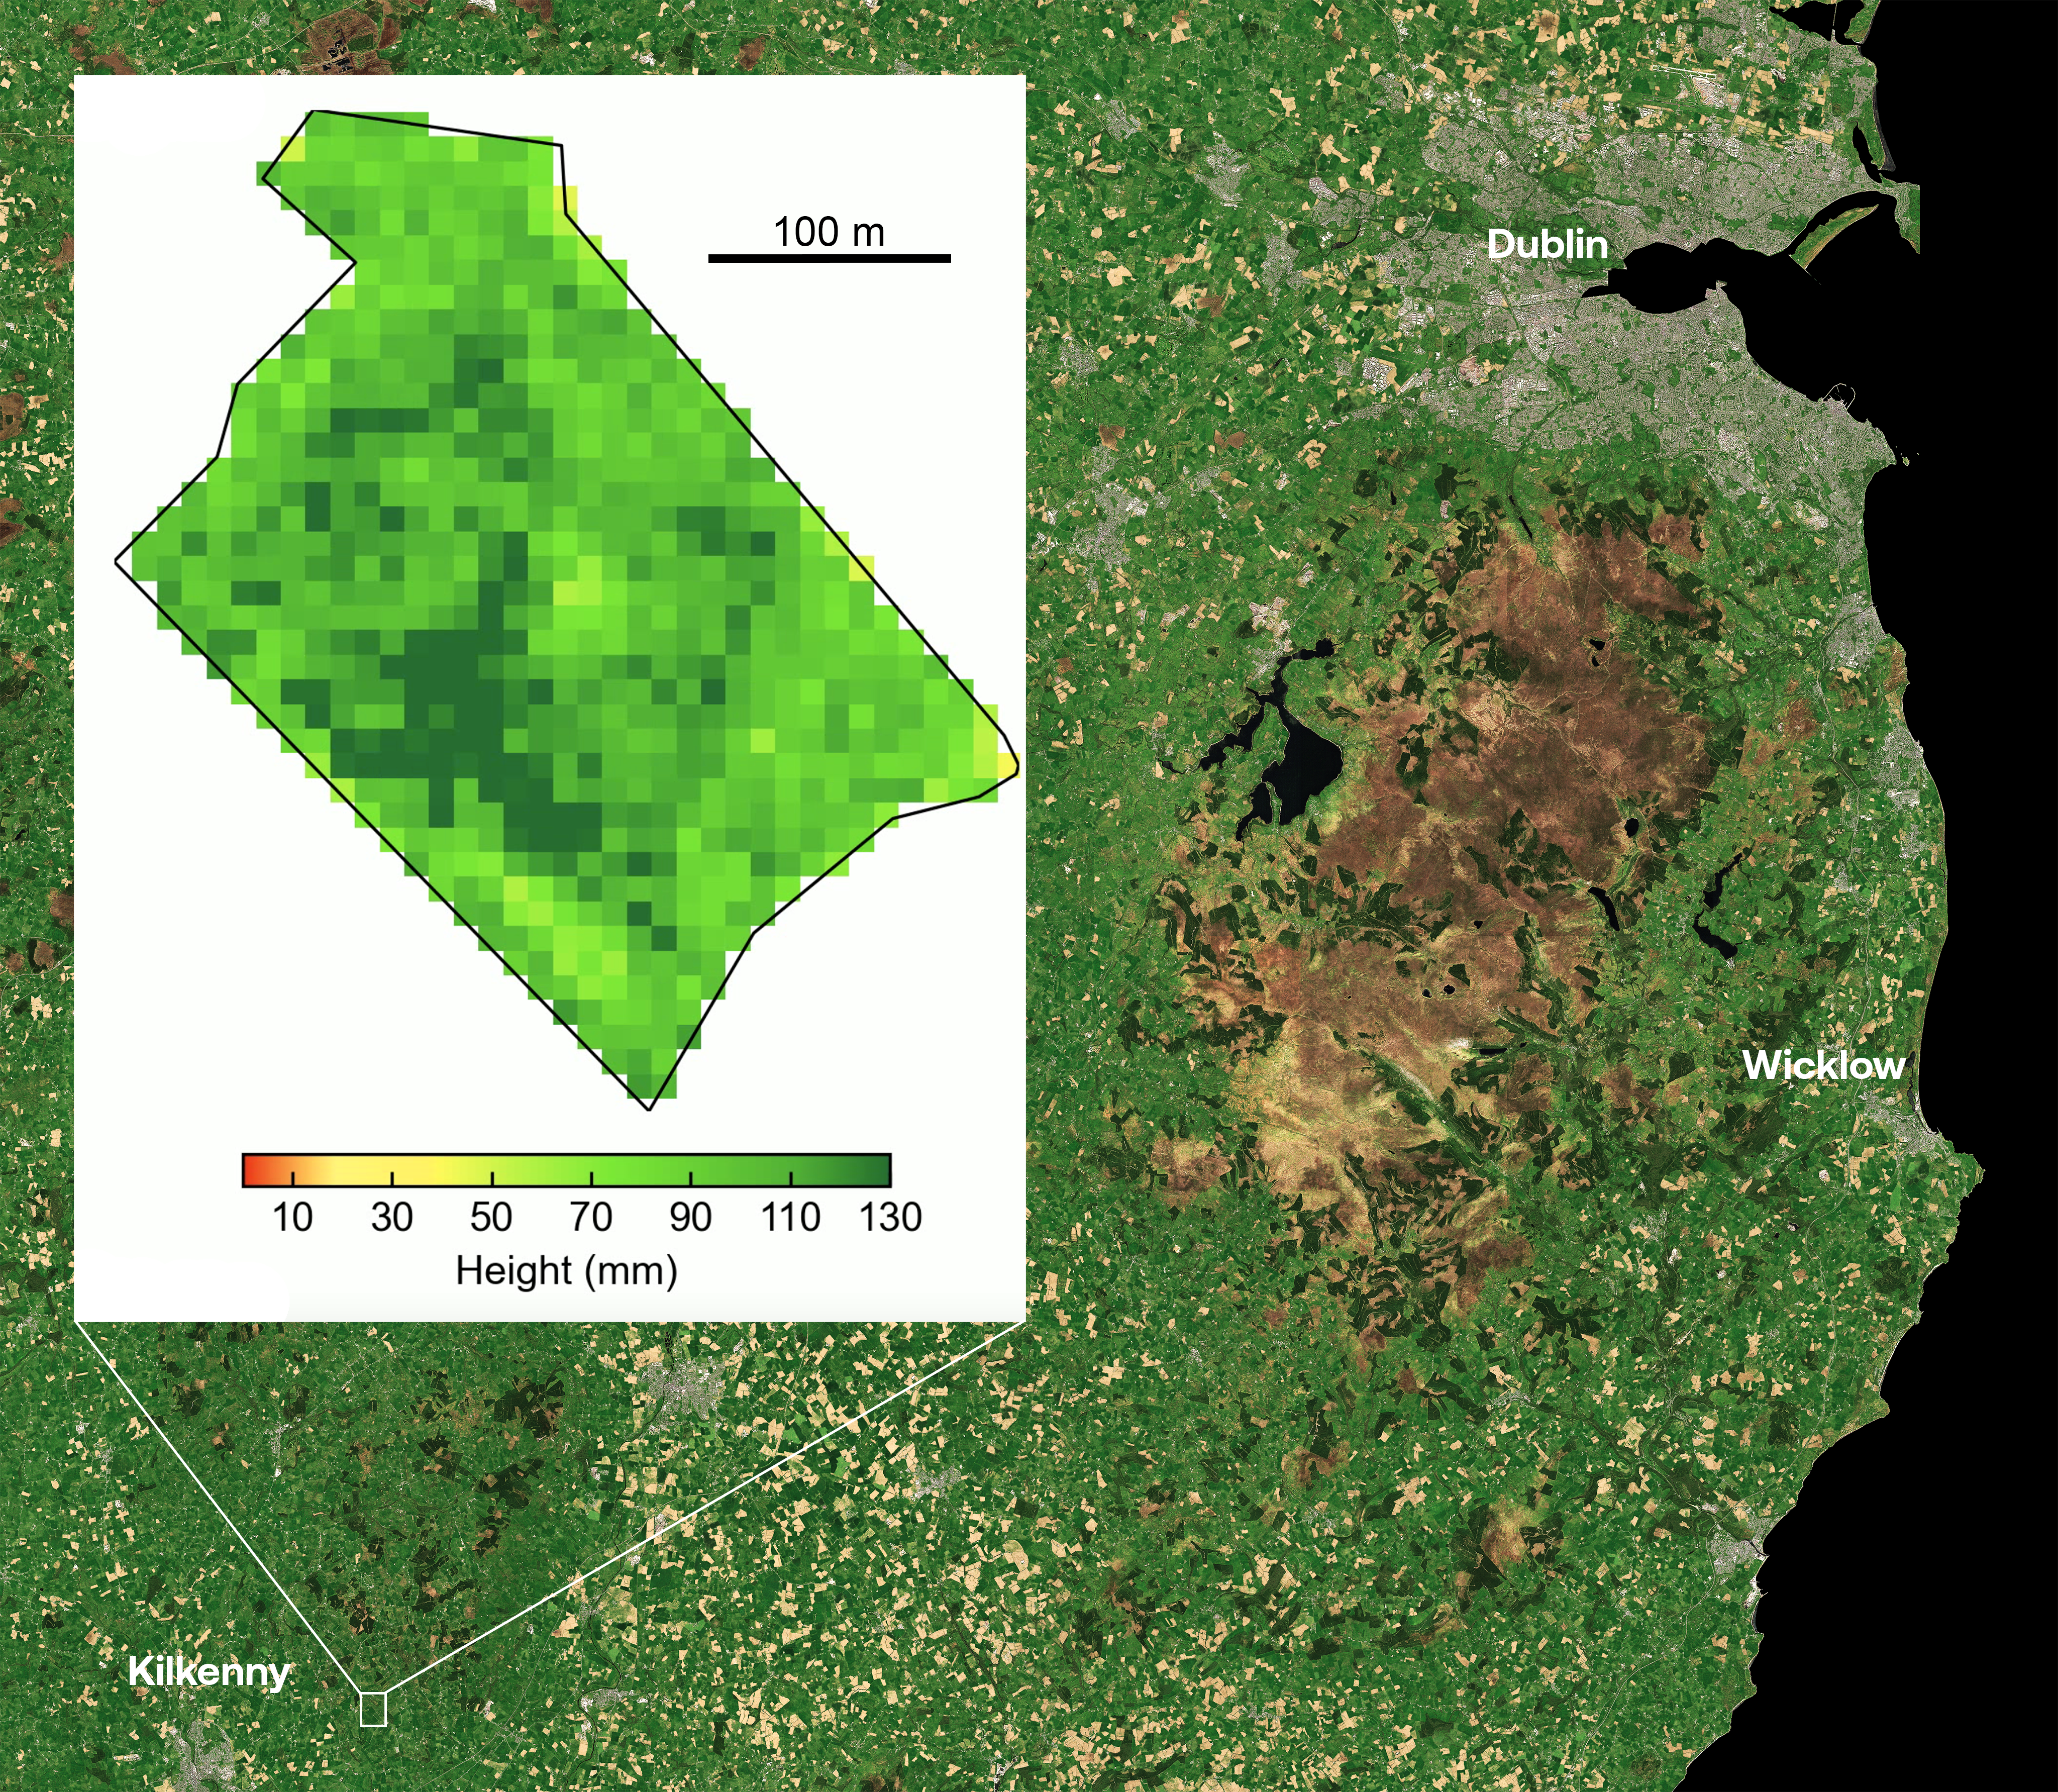 World-first technology that enables farmers to measure grass from space